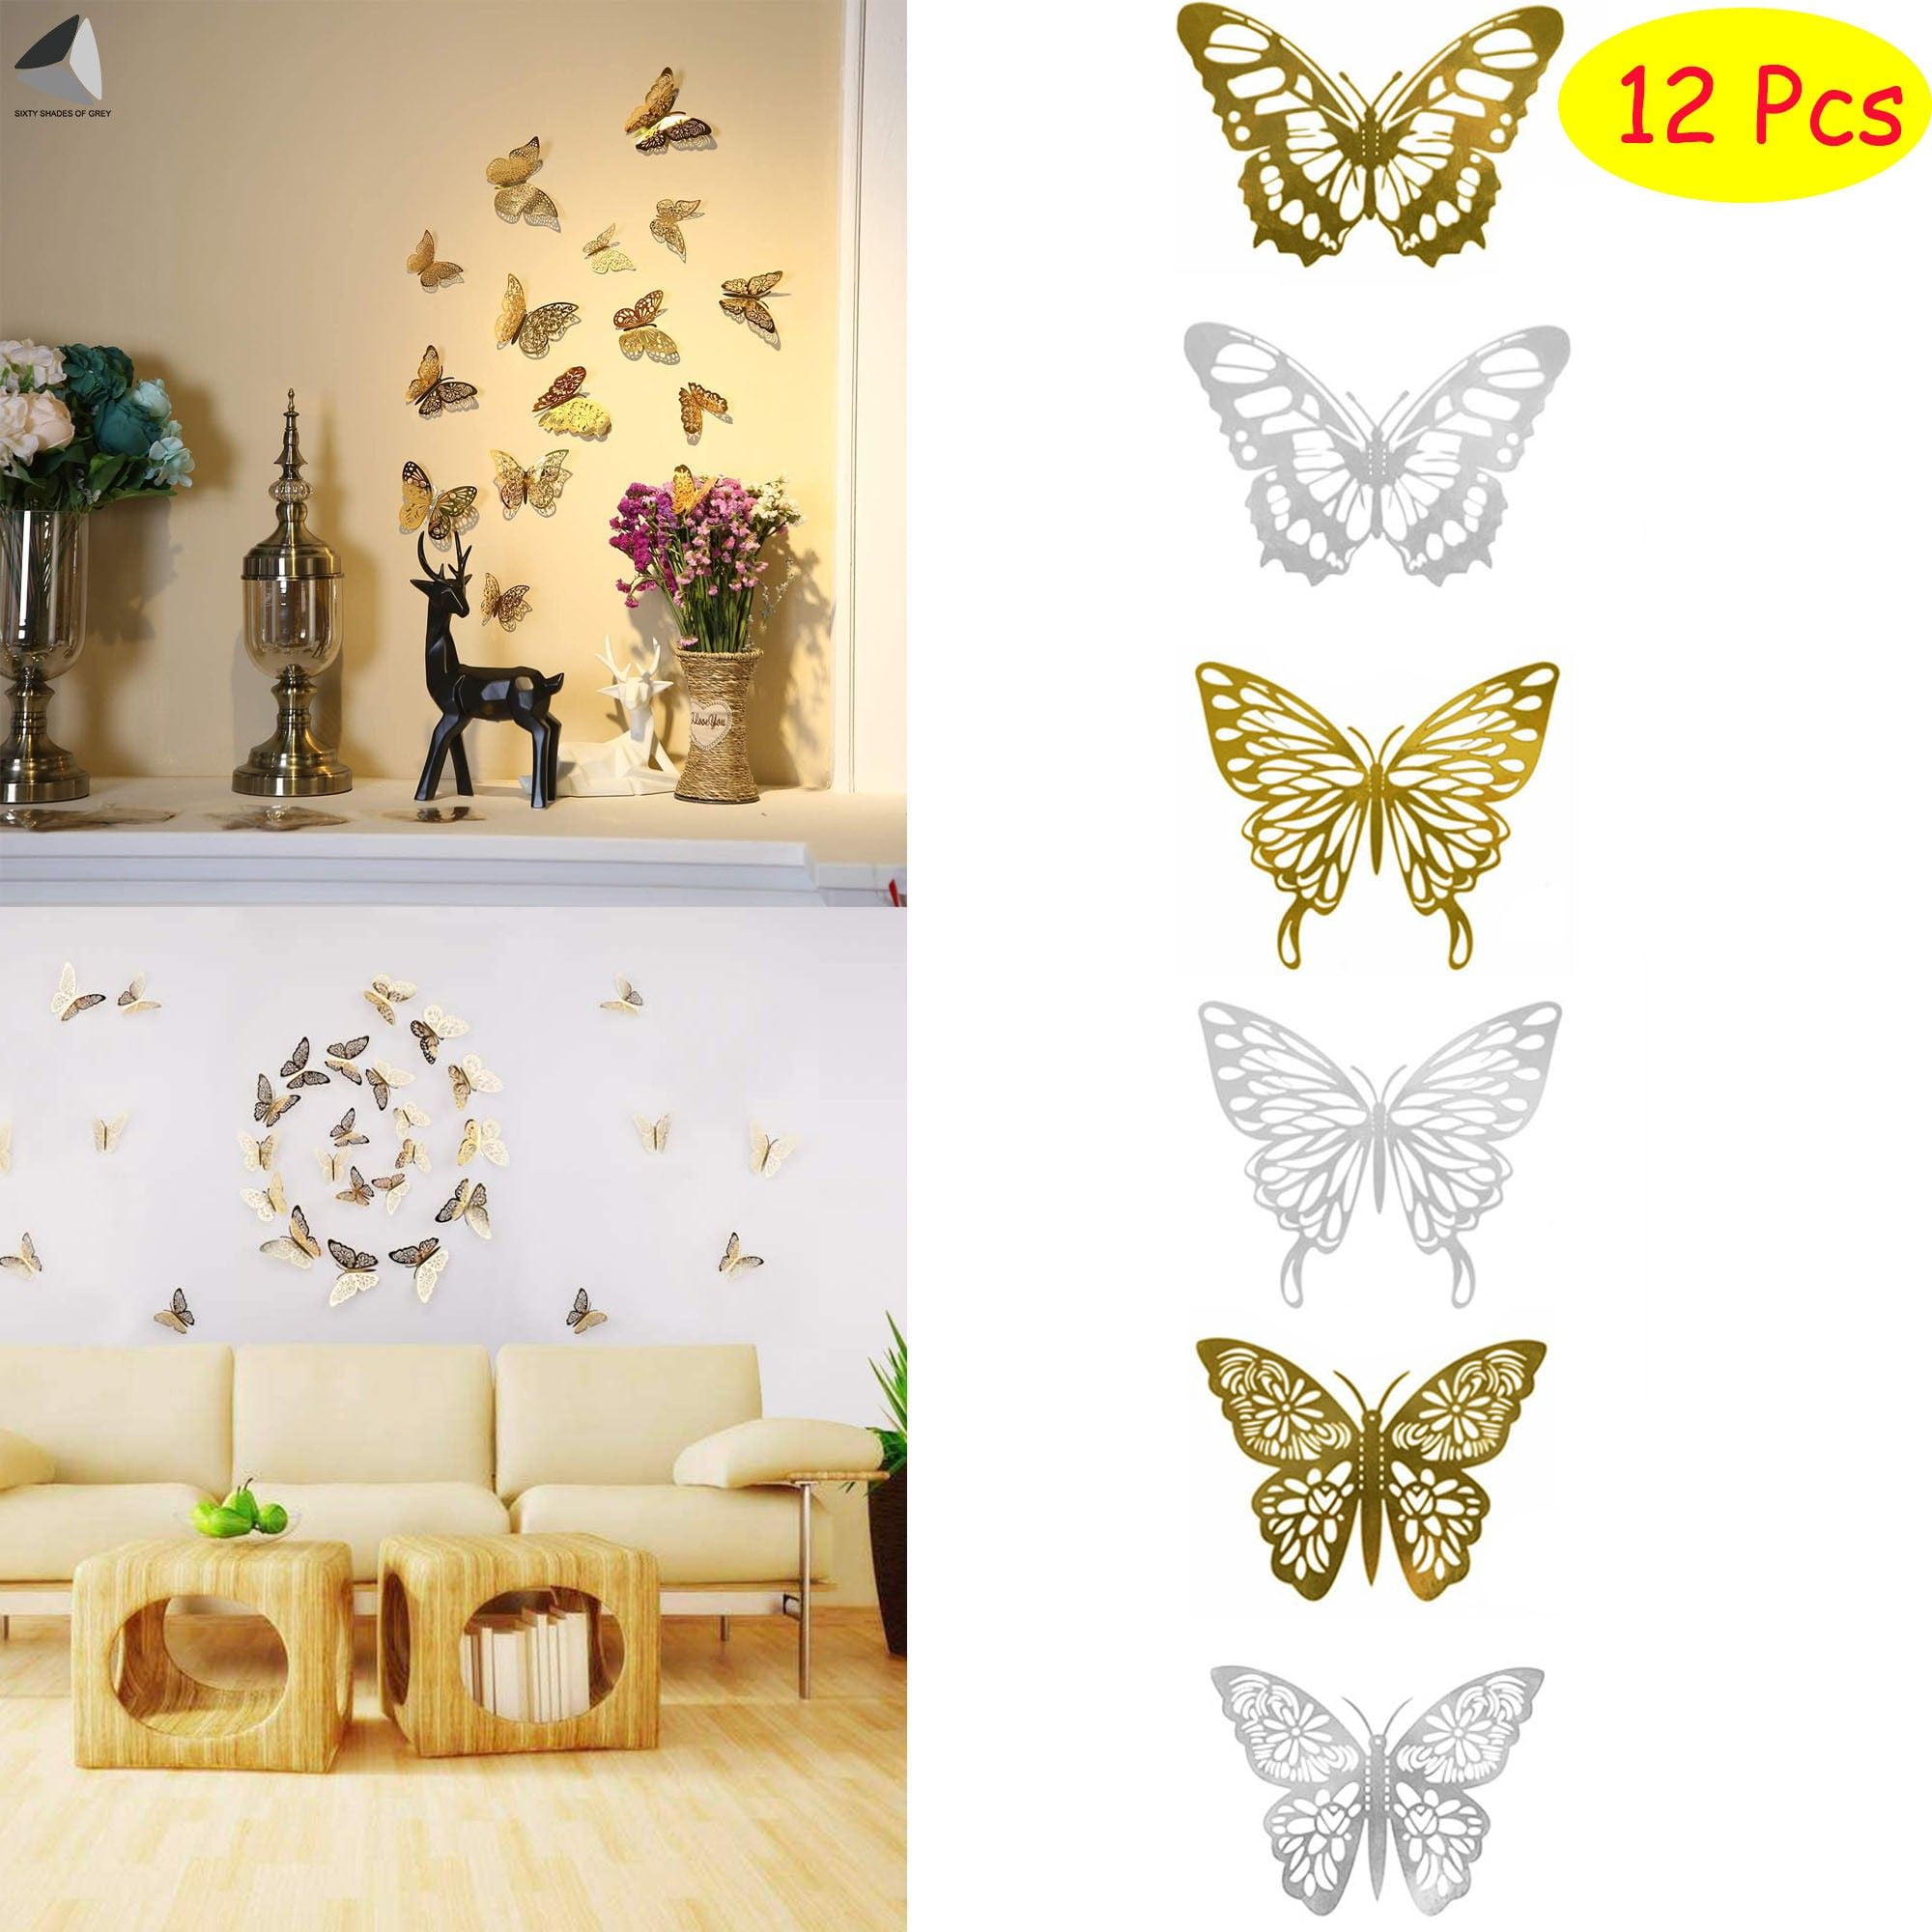 Hollow 3D Butterfly Wall Stickers 36pcs/Set Gold Silver Creative DIY Home Decor 